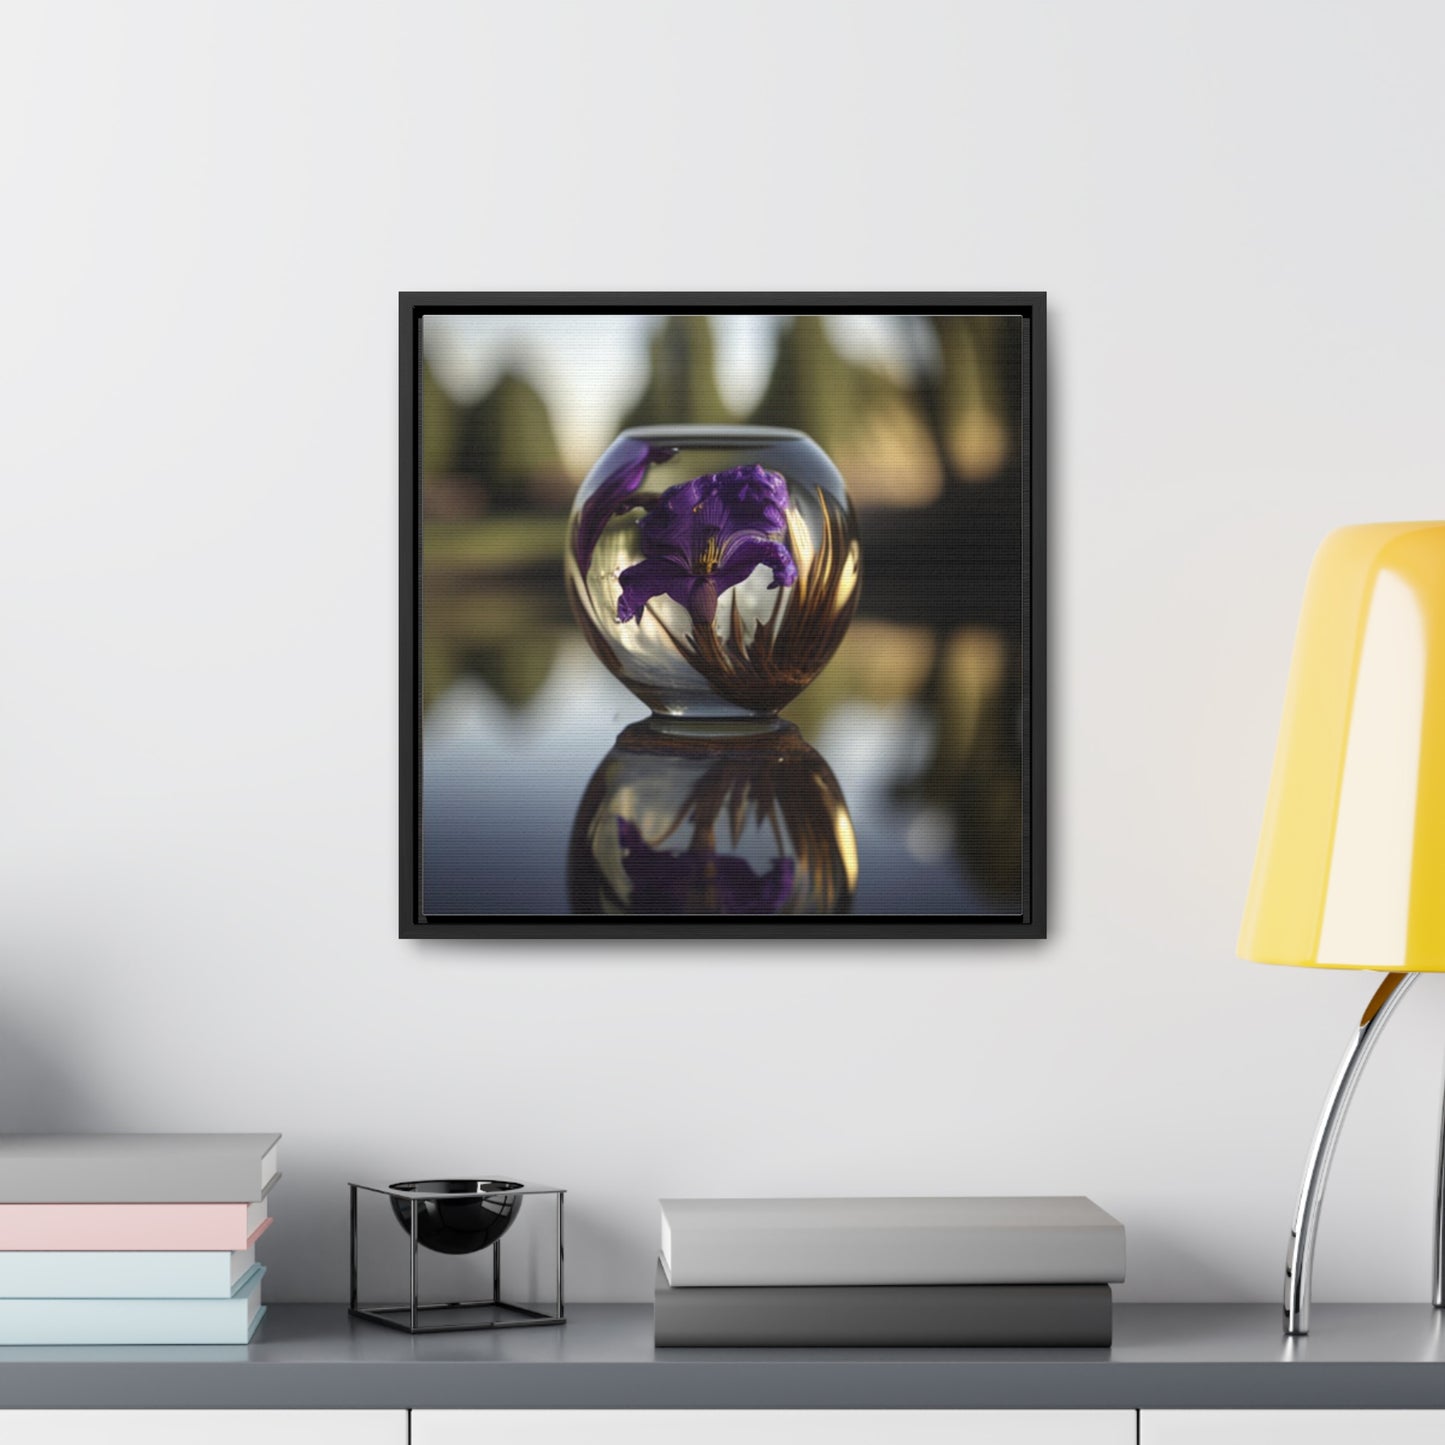 Gallery Canvas Wraps, Square Frame Purple Iris in a vase 2